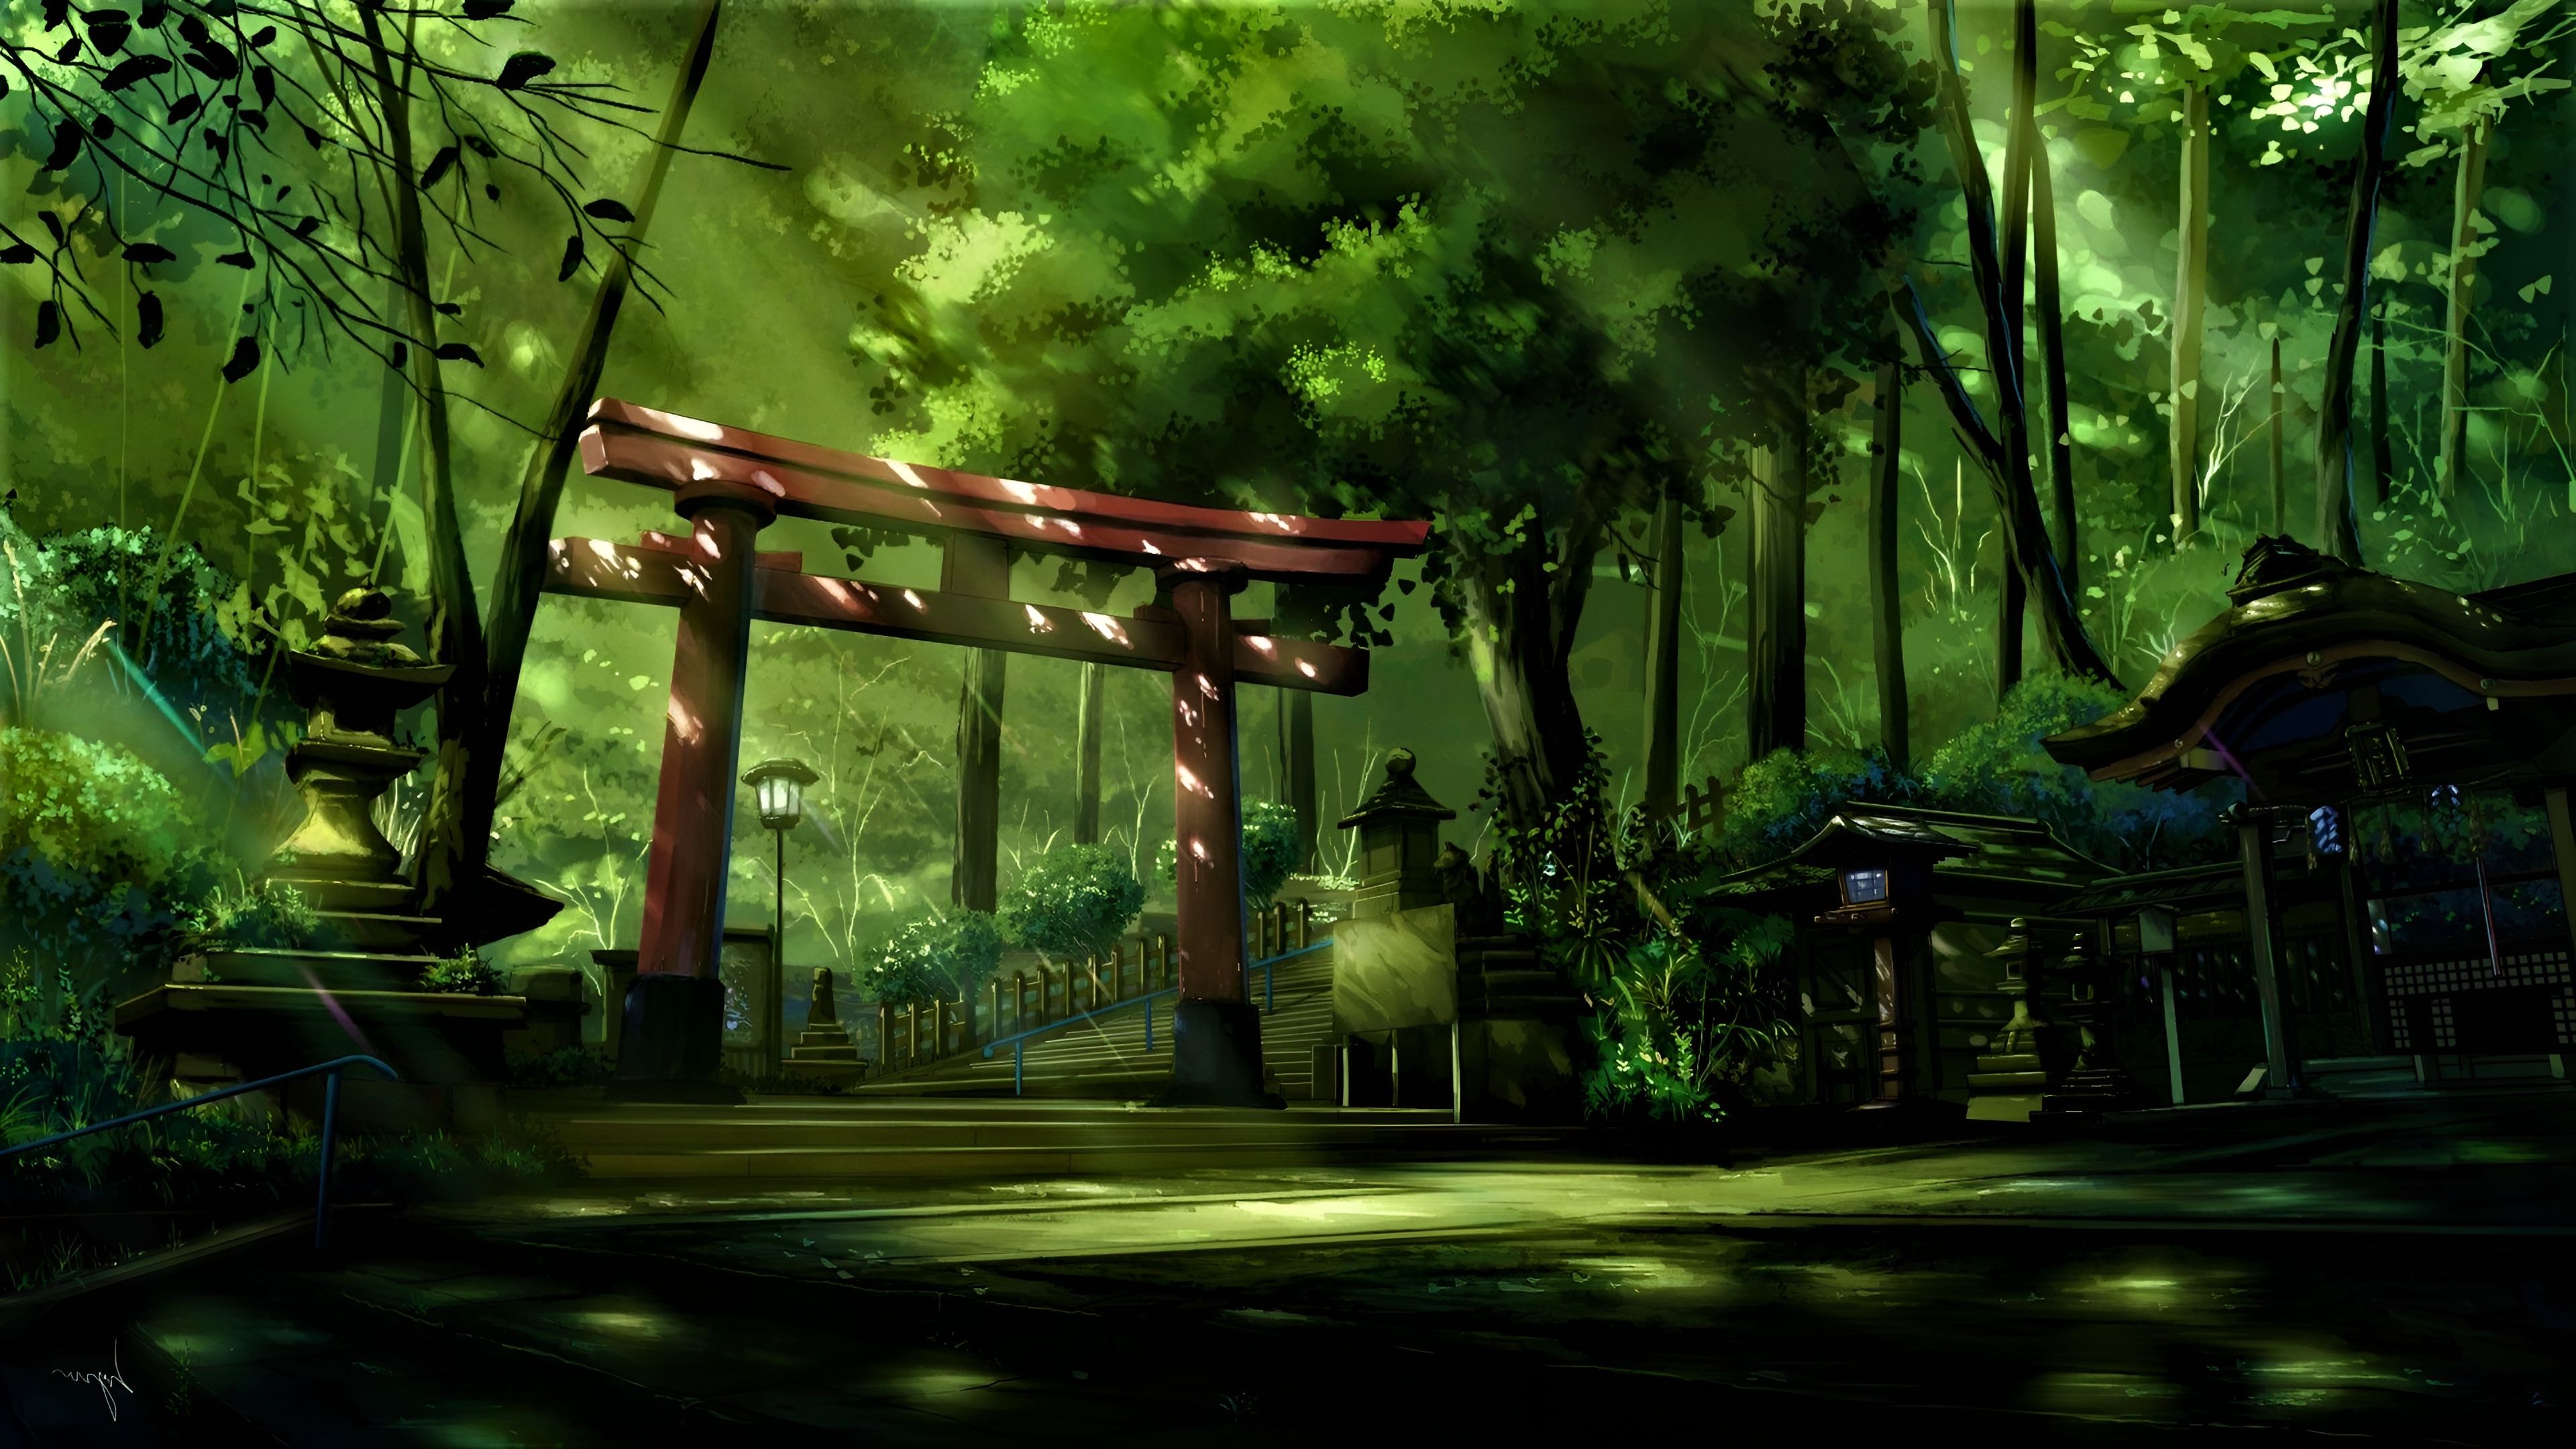 Wallpaper Anime Landscape Theatrical Scenery Ecoregion Natural  Environment Background  Download Free Image